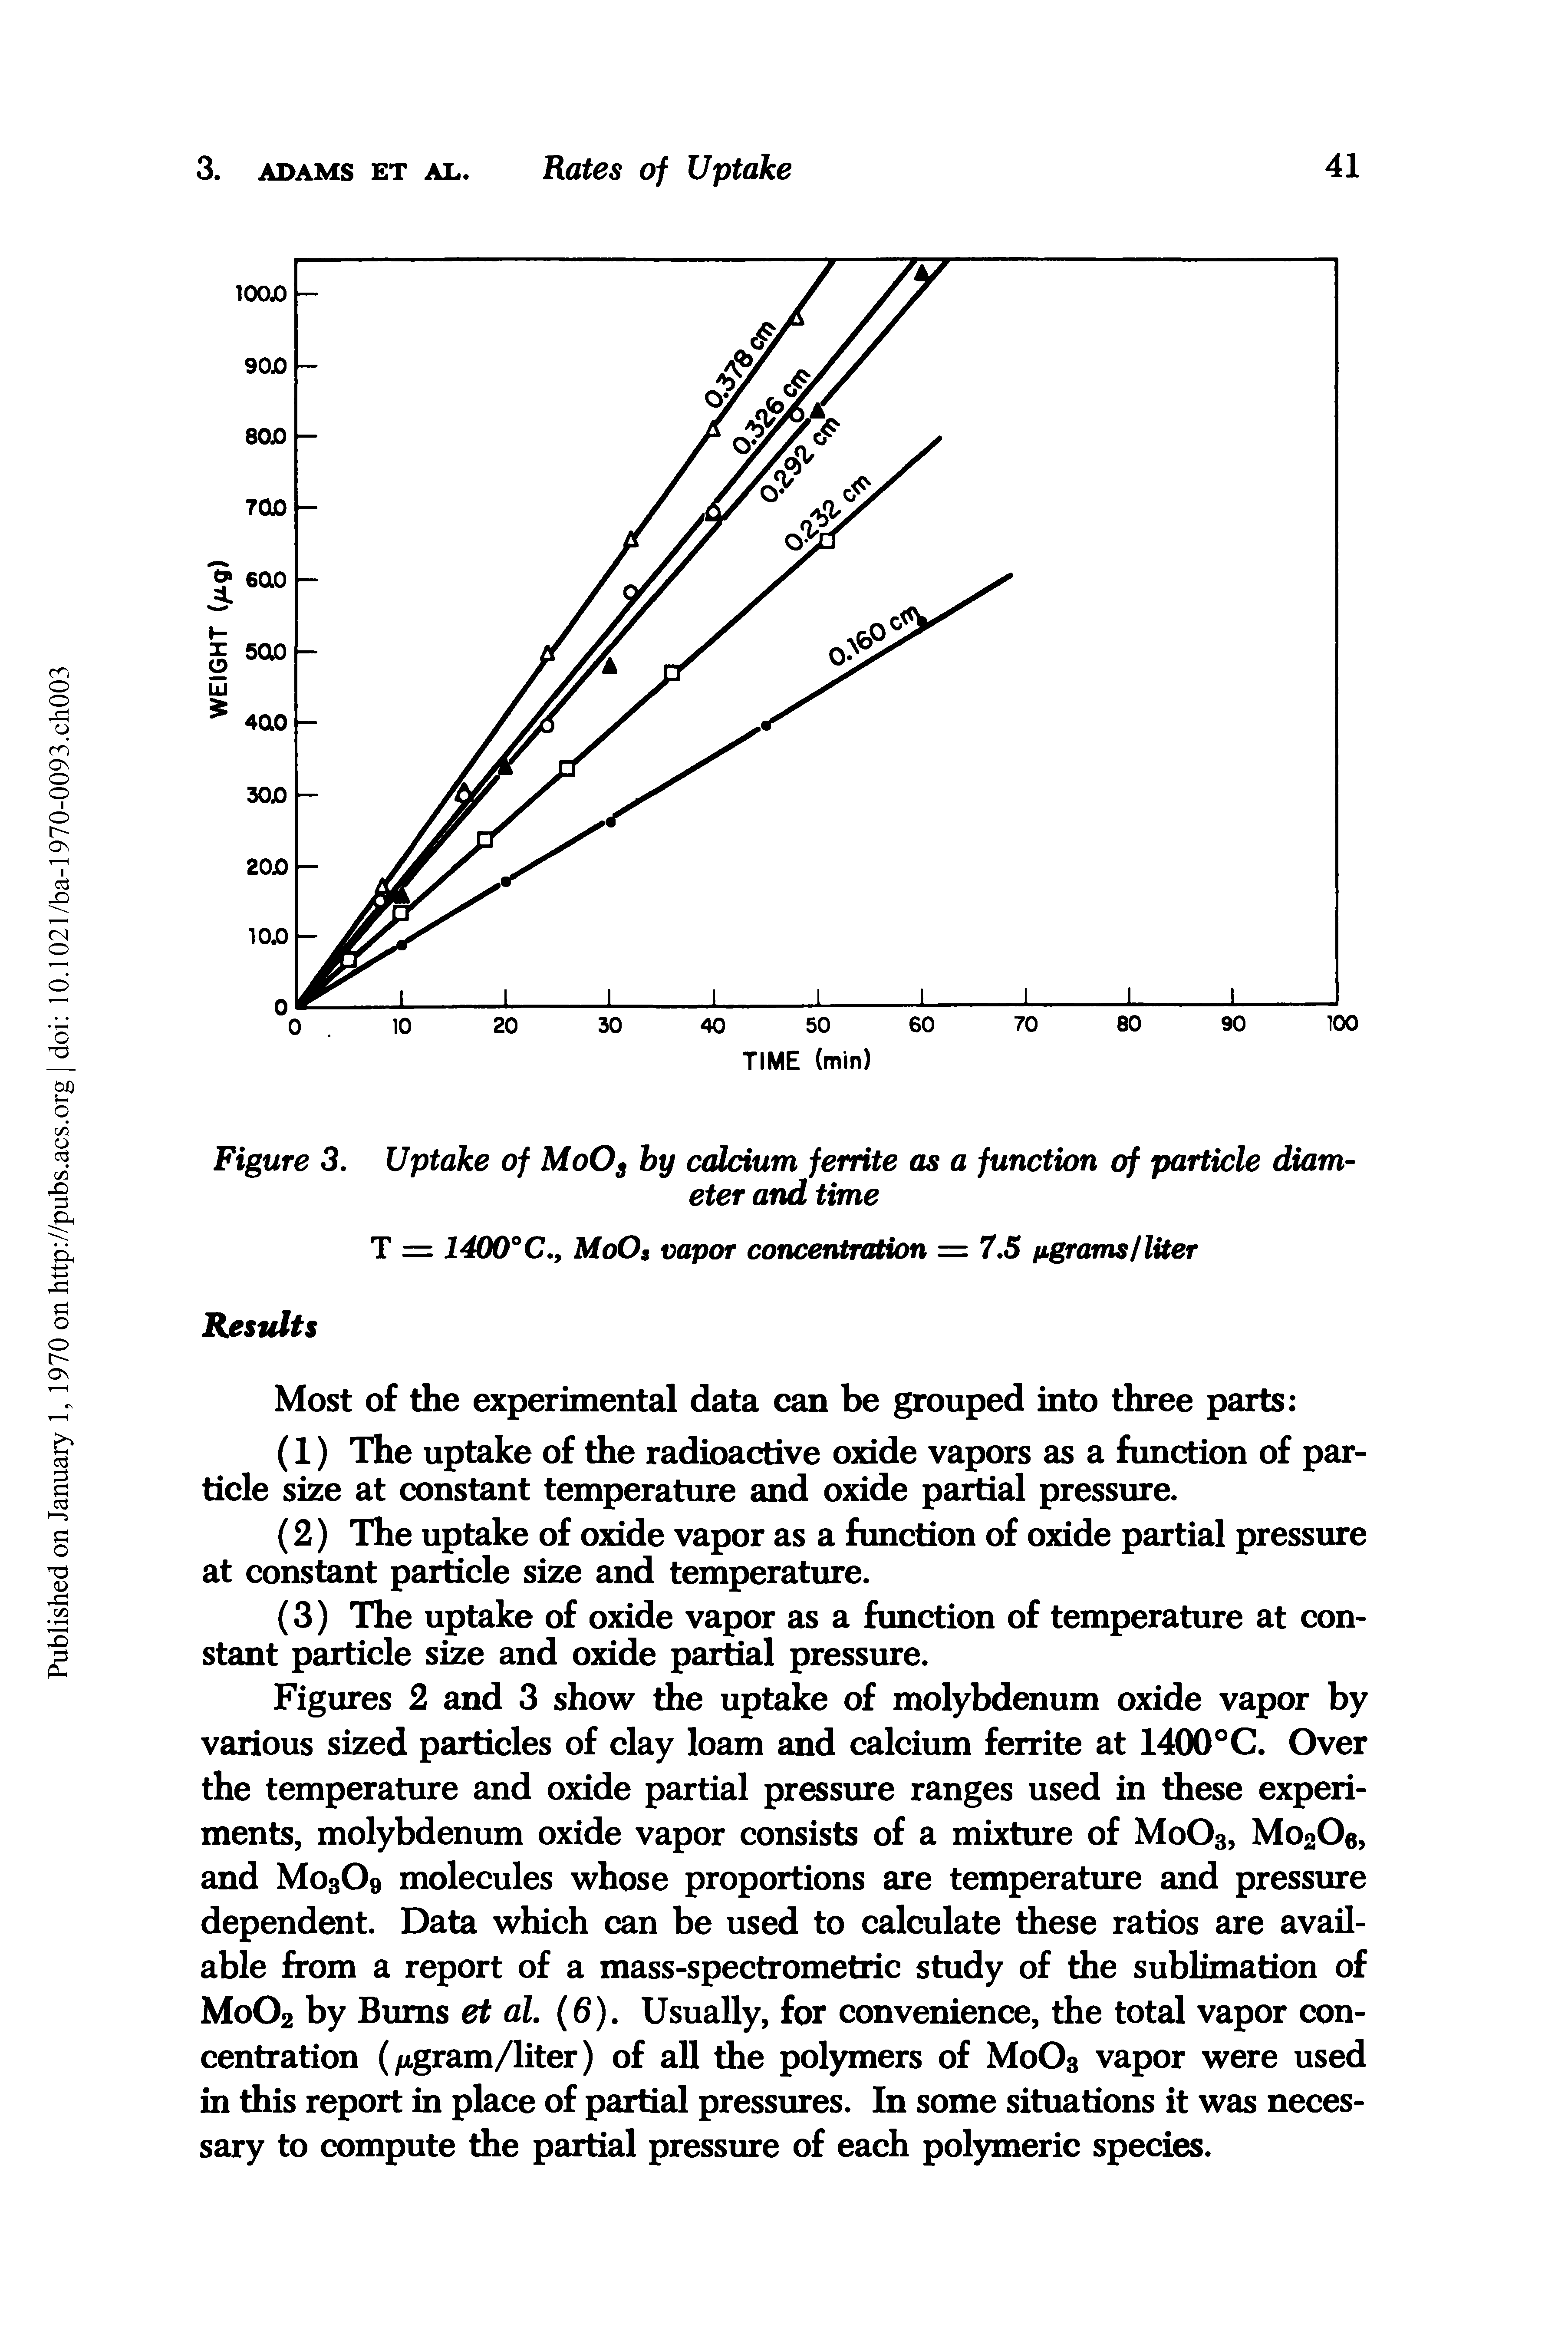 Figures 2 and 3 show the uptake of molybdenum oxide vapor by various sized particles of clay loam and calcium ferrite at 1400°C. Over the temperature and oxide partial pressure ranges used in these experiments, molybdenum oxide vapor consists of a mixture of M0O3, Mo2Oe, and Mo309 molecules whose proportions are temperature and pressure dependent. Data which can be used to calculate these ratios are available from a report of a mass-spectrometric study of the sublimation of M0O2 by Bums et al. (6). Usually, for convenience, the total vapor concentration (/xgram/liter) of all the polymers of M0O3 vapor were used in this report in place of partial pressures. In some situations it was necessary to compute the partial pressure of each polymeric species.